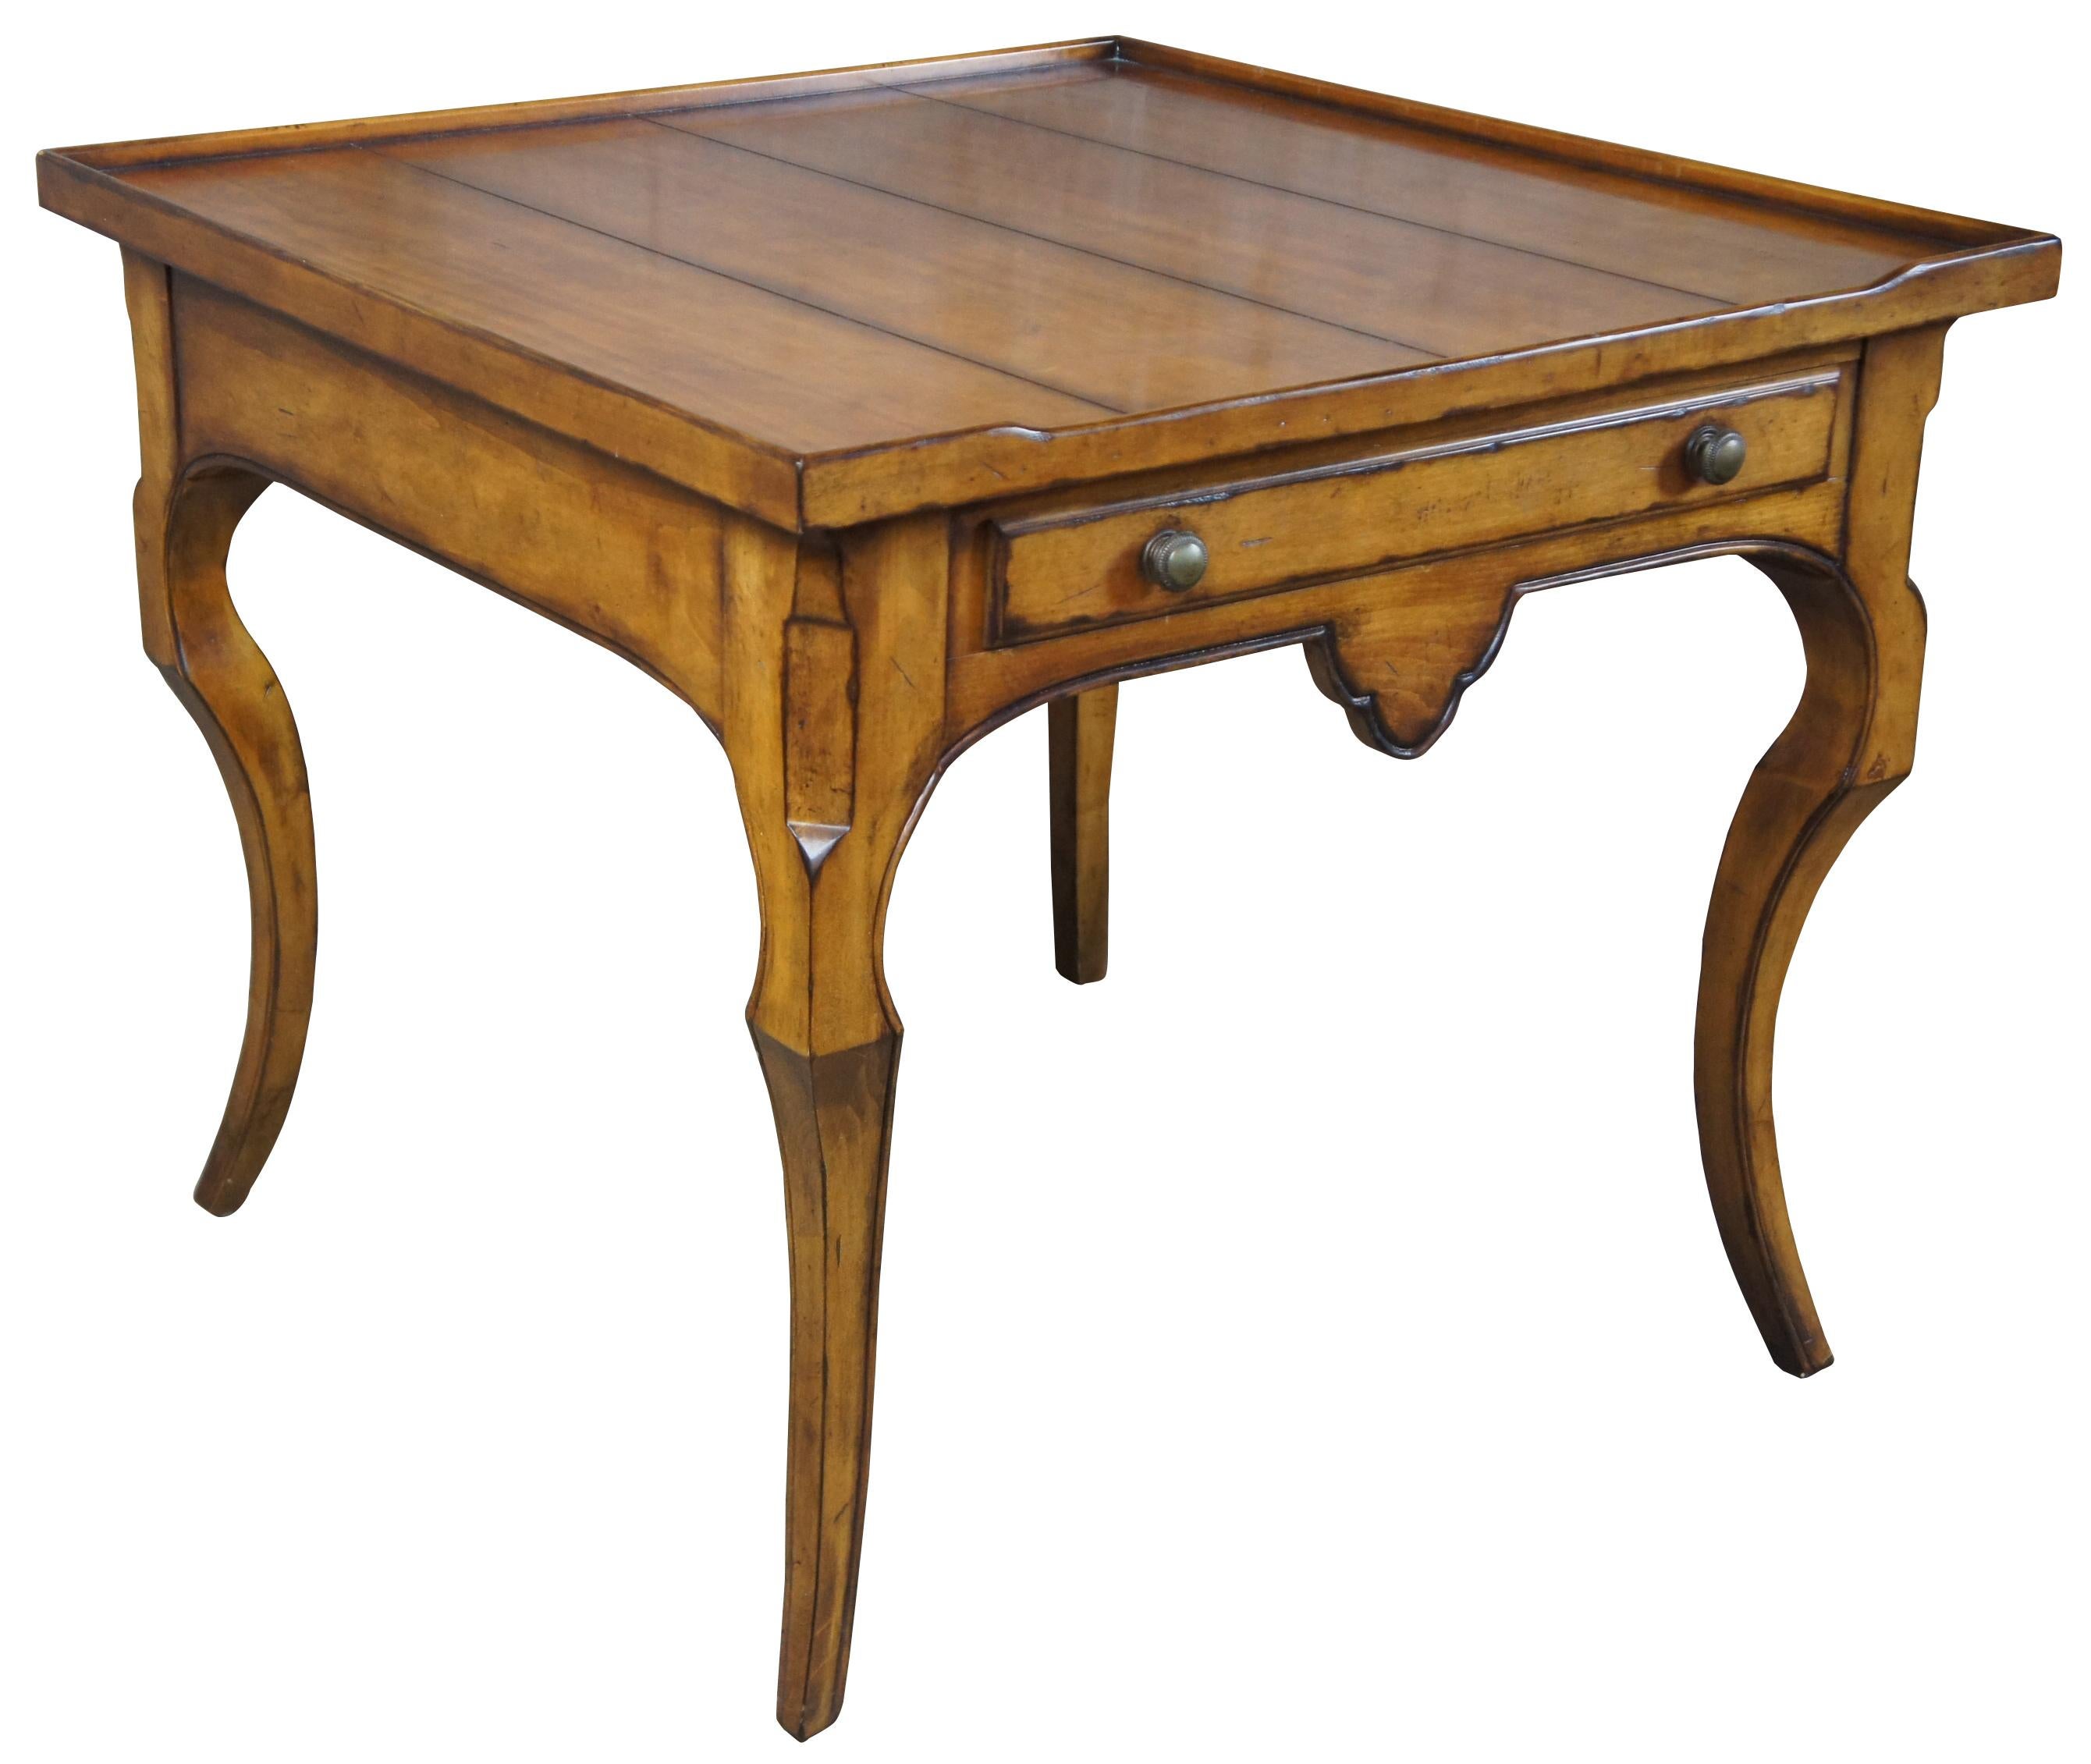 Century Furniture Brisbane chairside table. Made from maple with a distressed French country design. Includes flared legs and inset plank top with drawer.
 